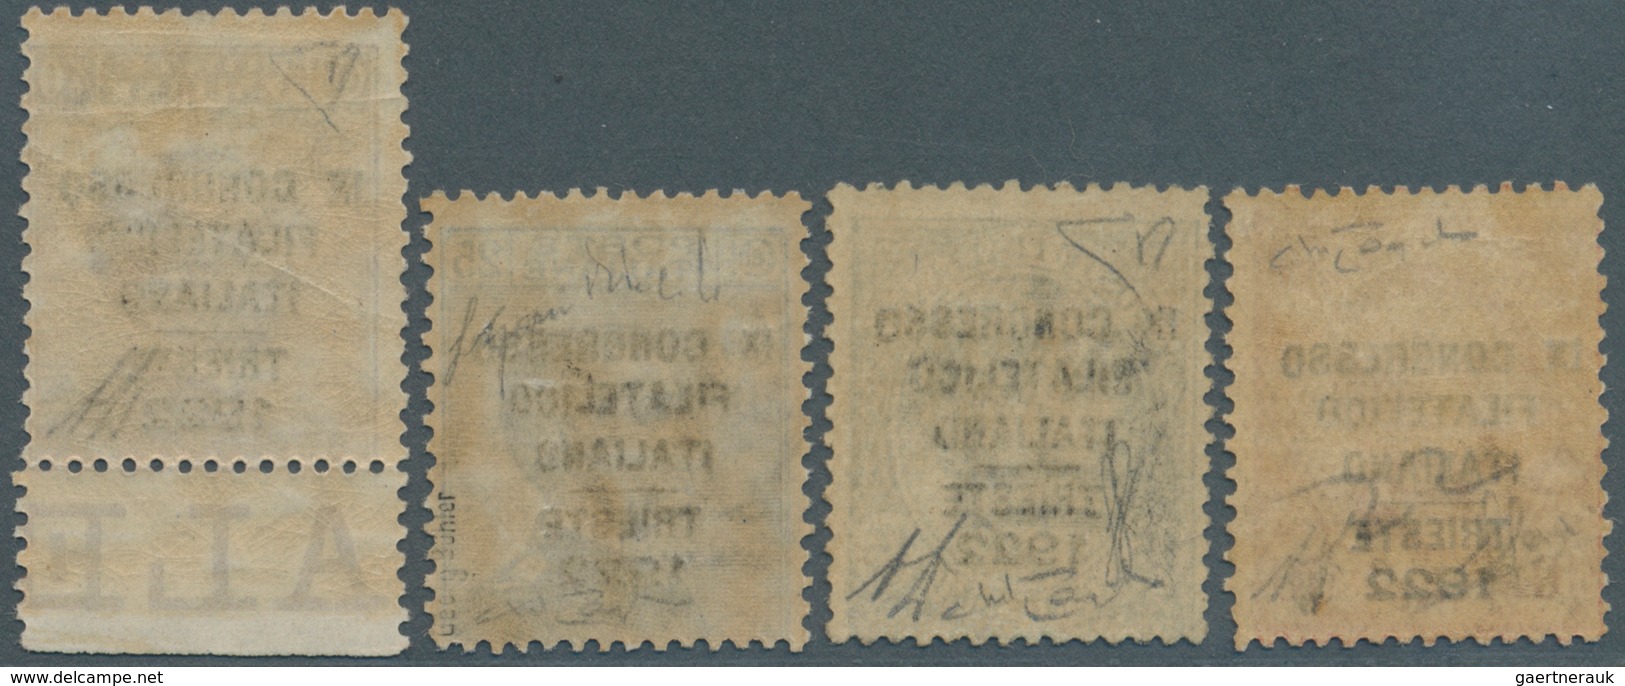 Italien: 1922, Philatelic Congress Triest, Complete Set Mint O.g., Several Signatures, E.g. A.Diena, - Mint/hinged